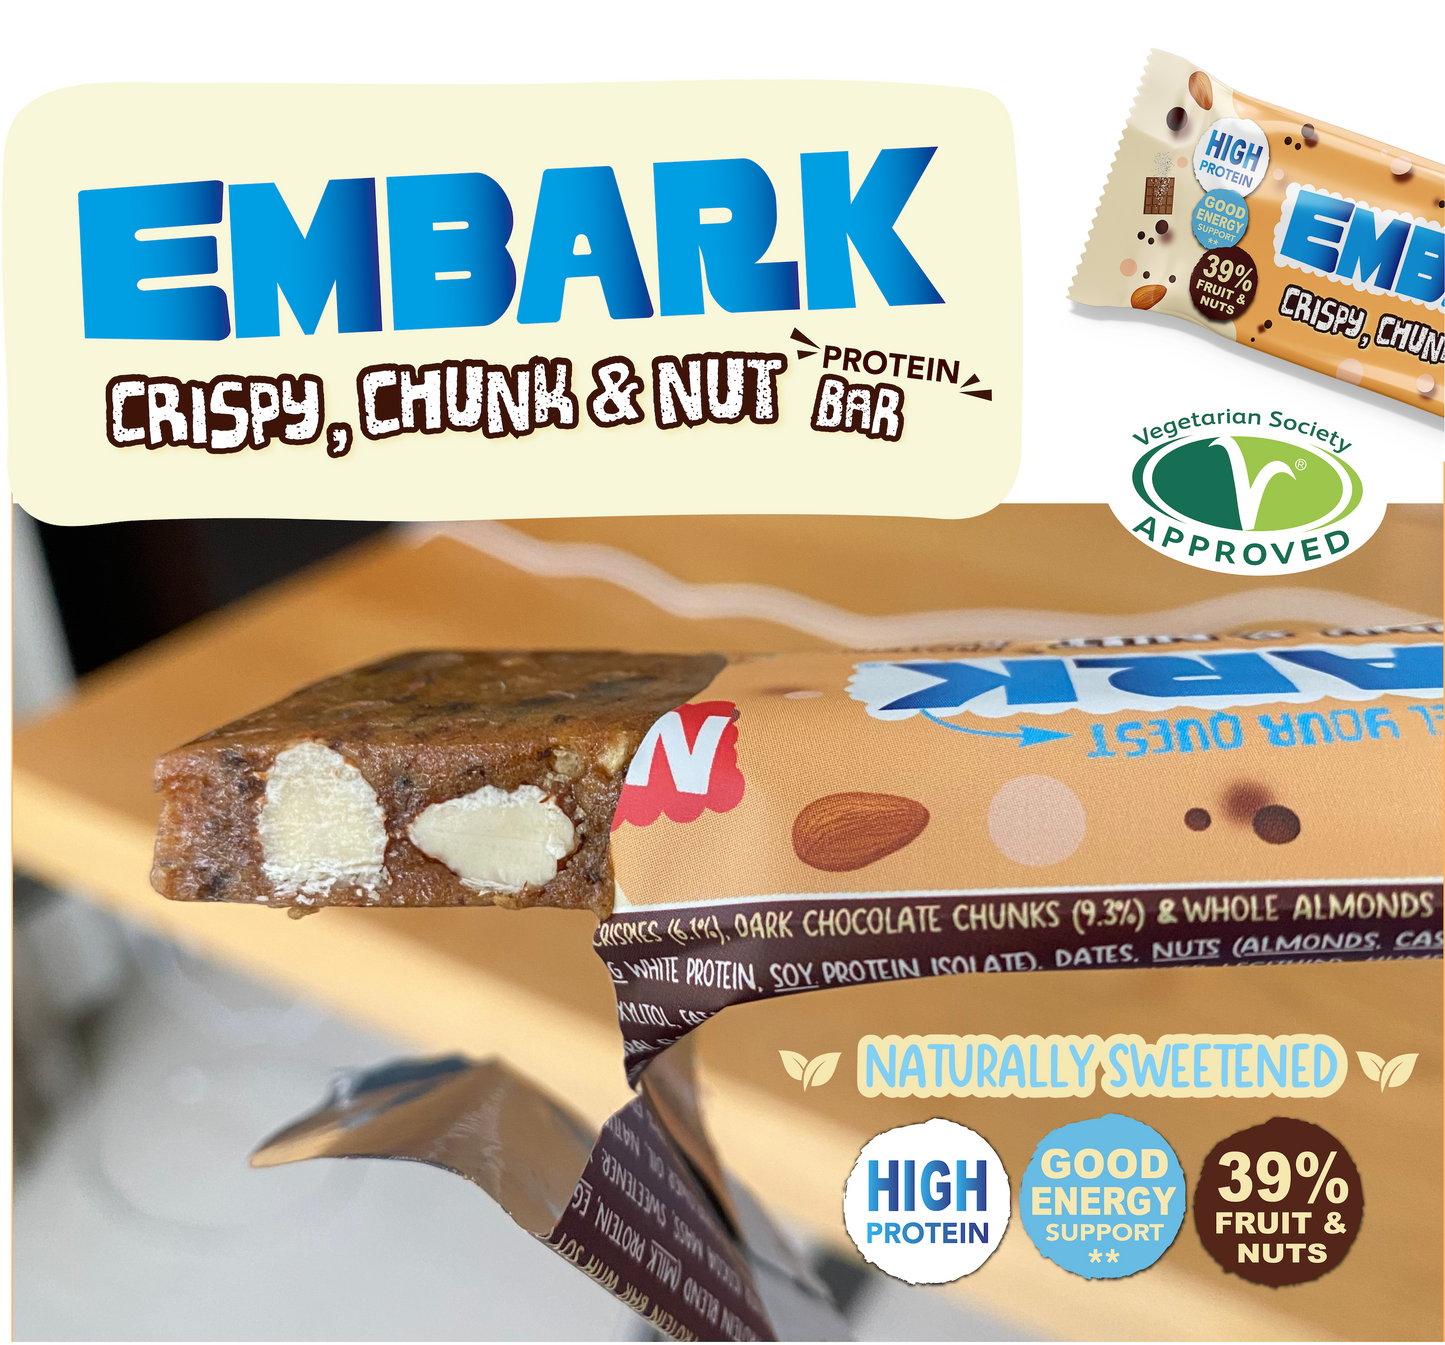 12 x Chocolate Cookie Dough Natural Protein Bars